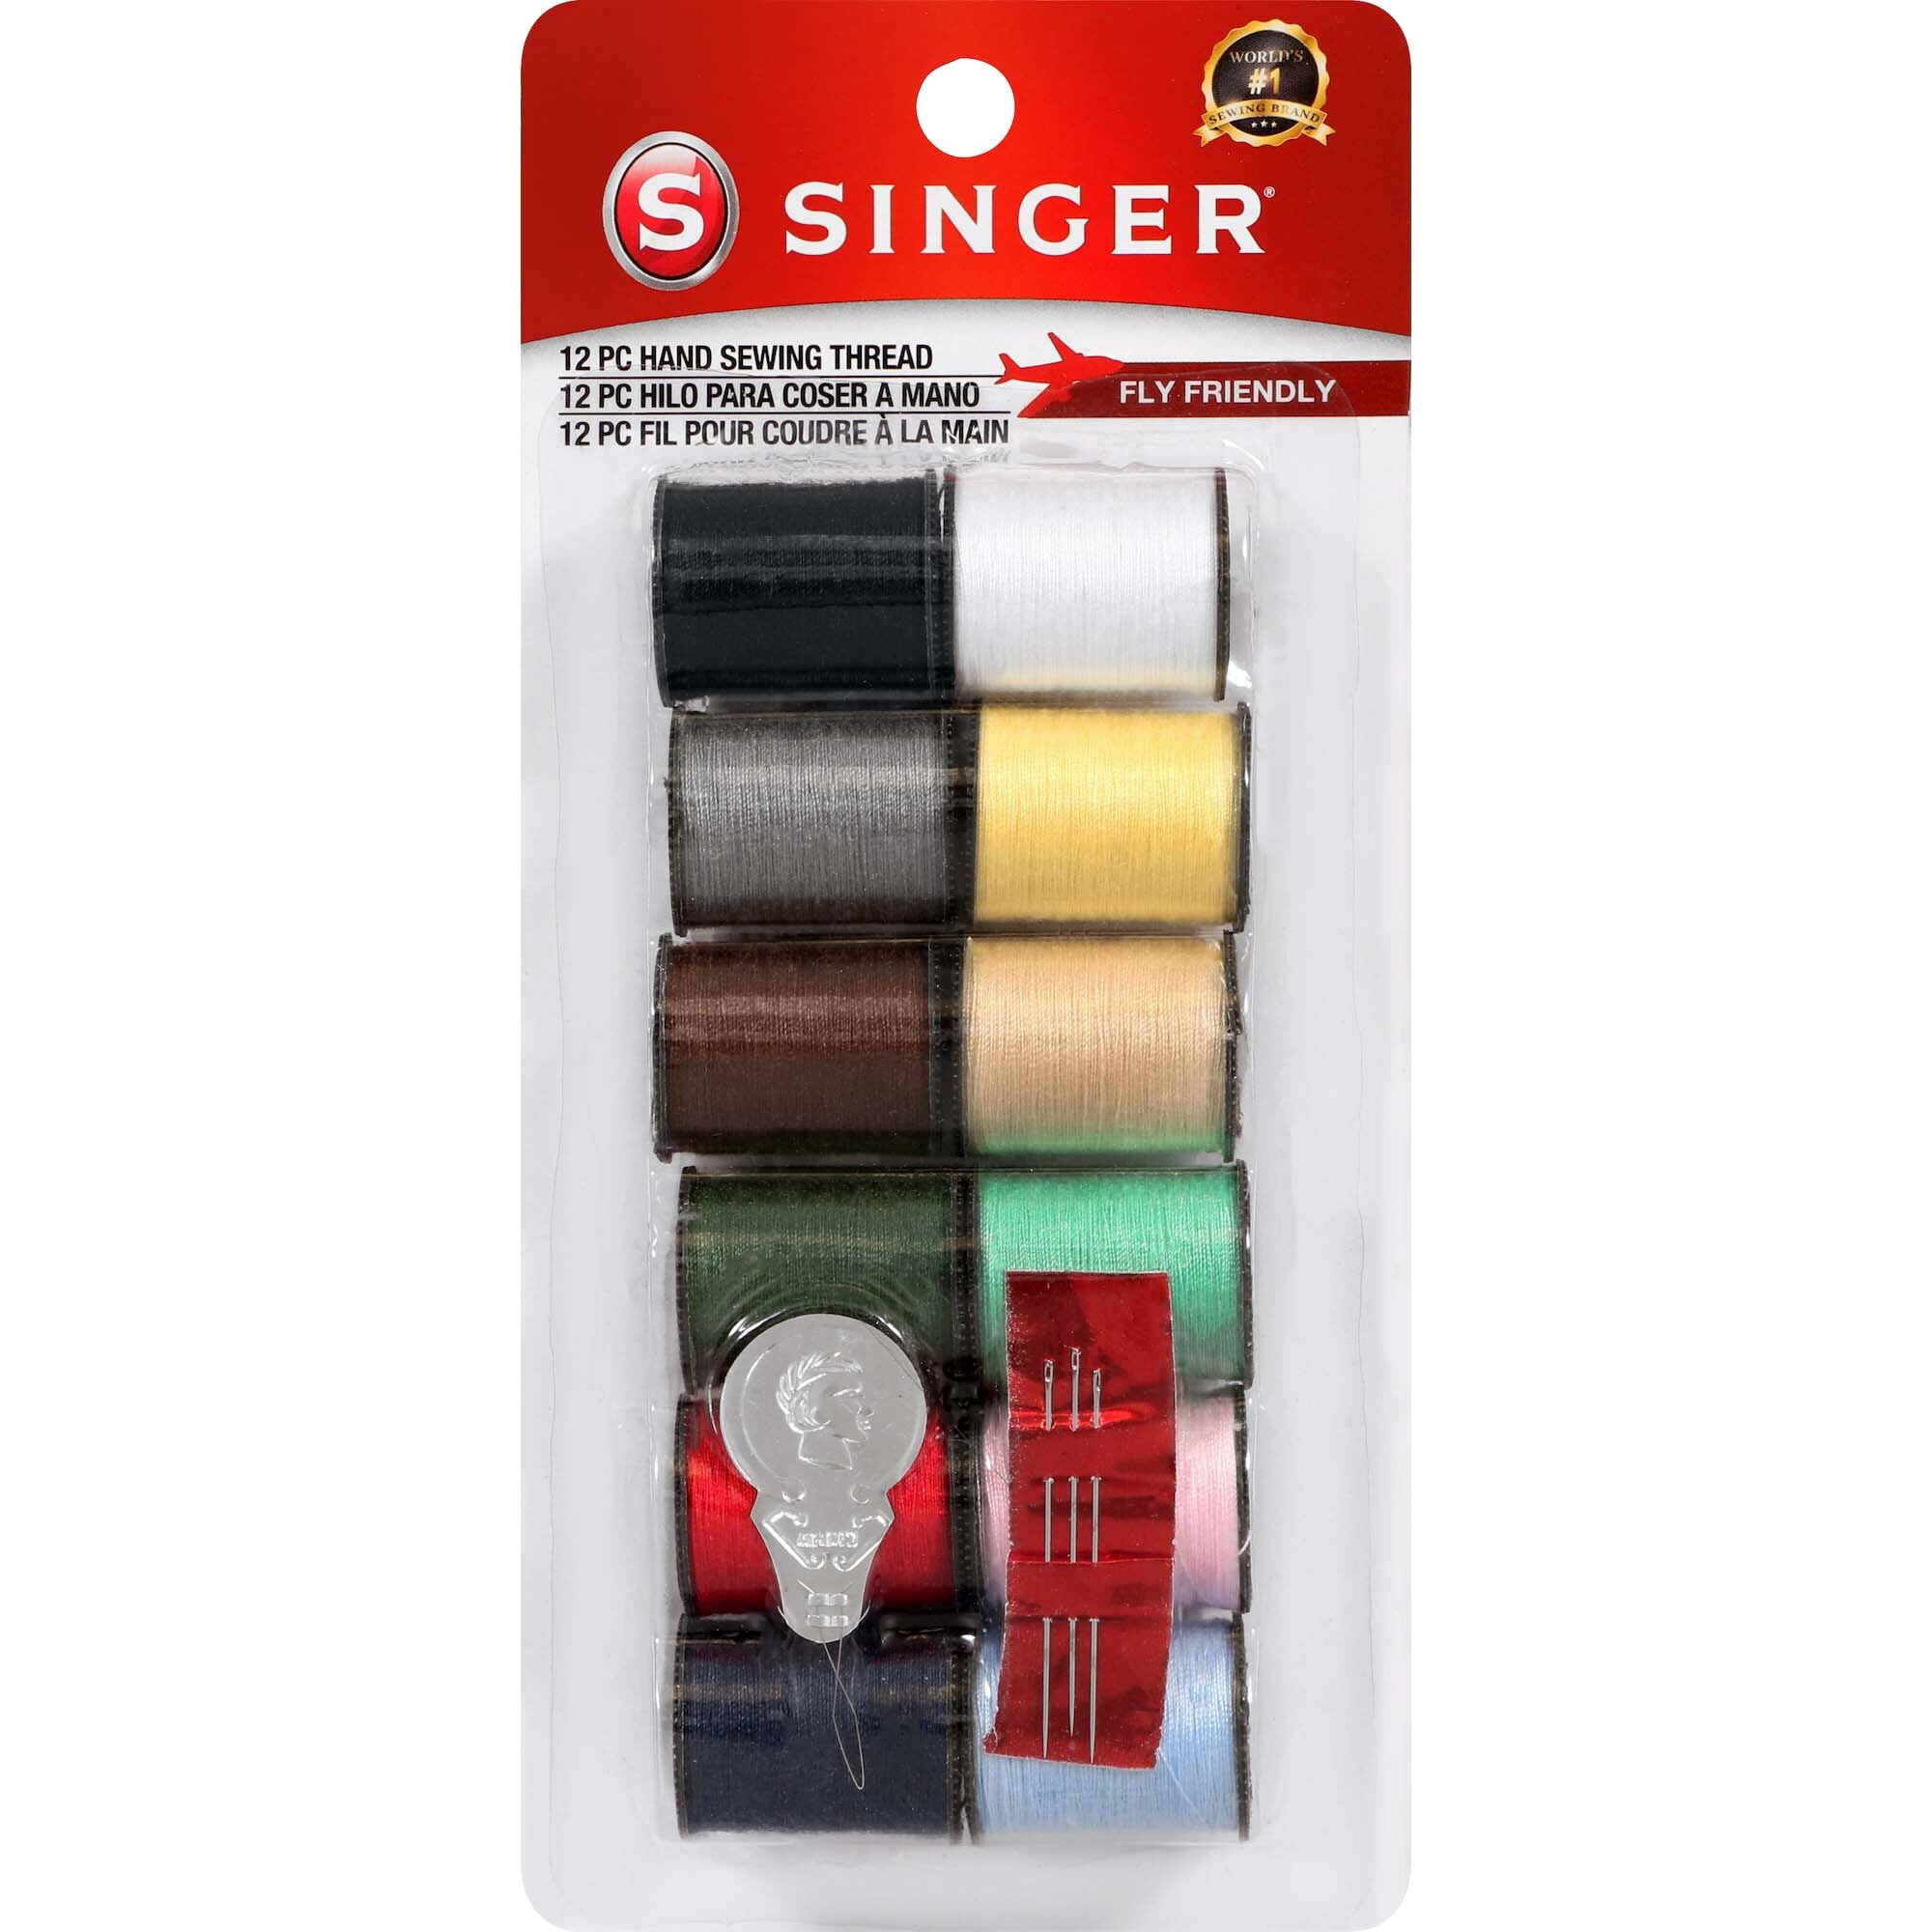  SINGER 00290 Self-Threading Hand Sewing Needles, Assorted,  15-Count